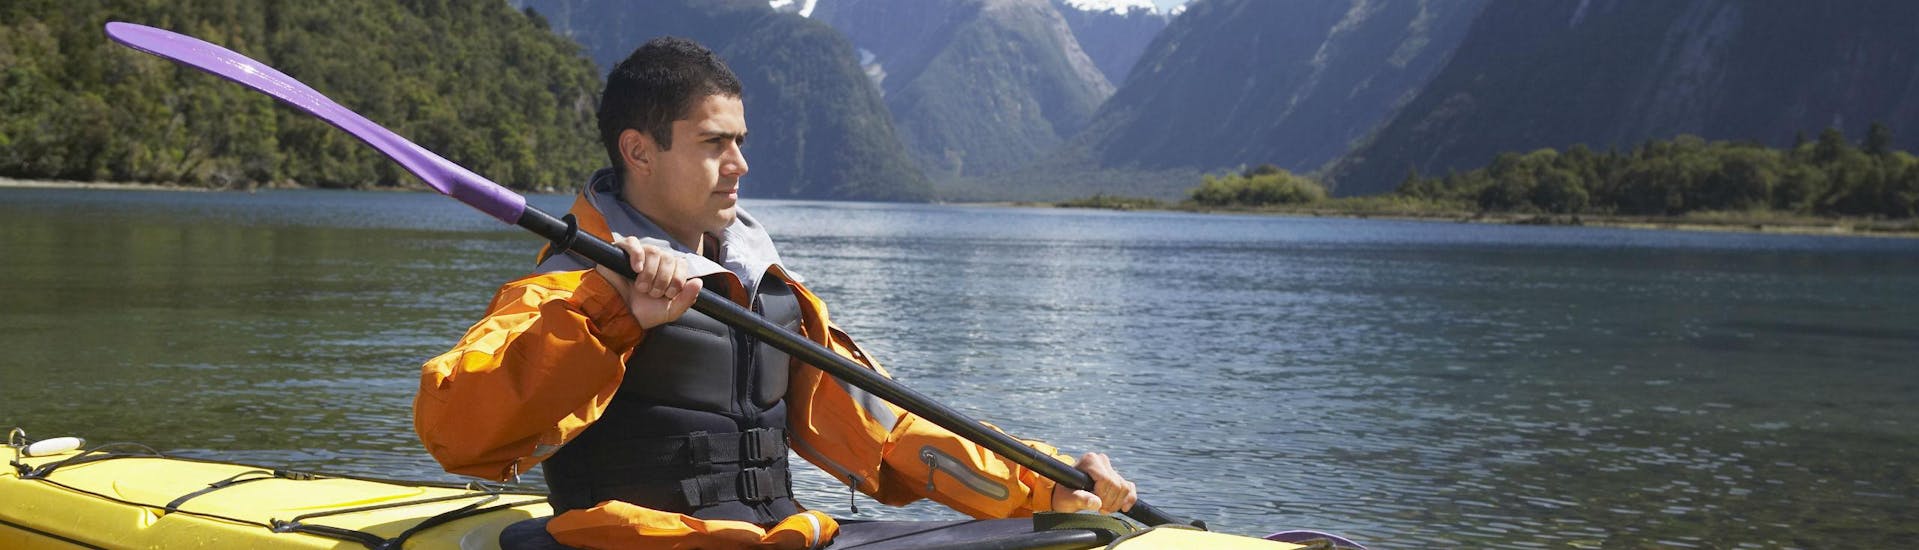 A young man is kayaking in Milford Sound and enjoying the spectacular scenery of the fjord.